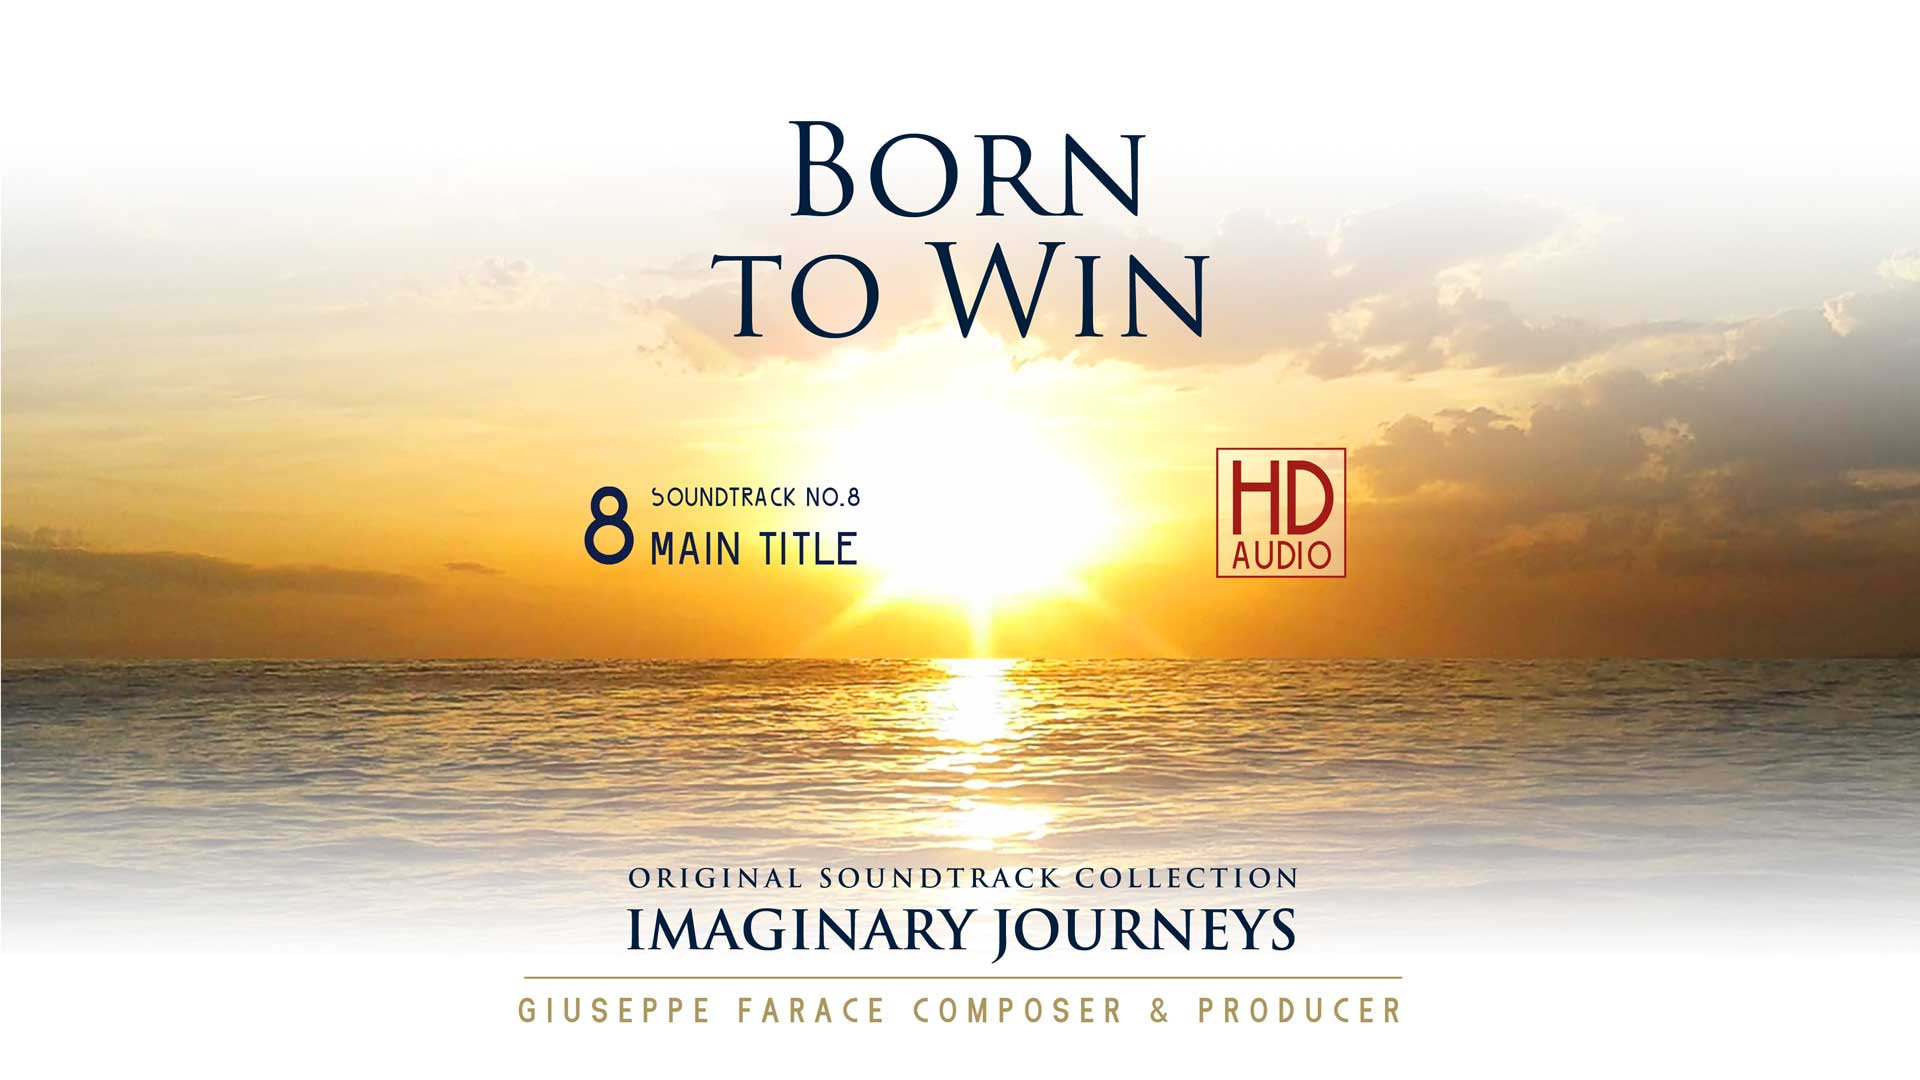 BORNO TO WIN - Main title of the Soundtrack No.8 - Imaginary Journeys Collection - Composer & producer: Giuseppe Farace